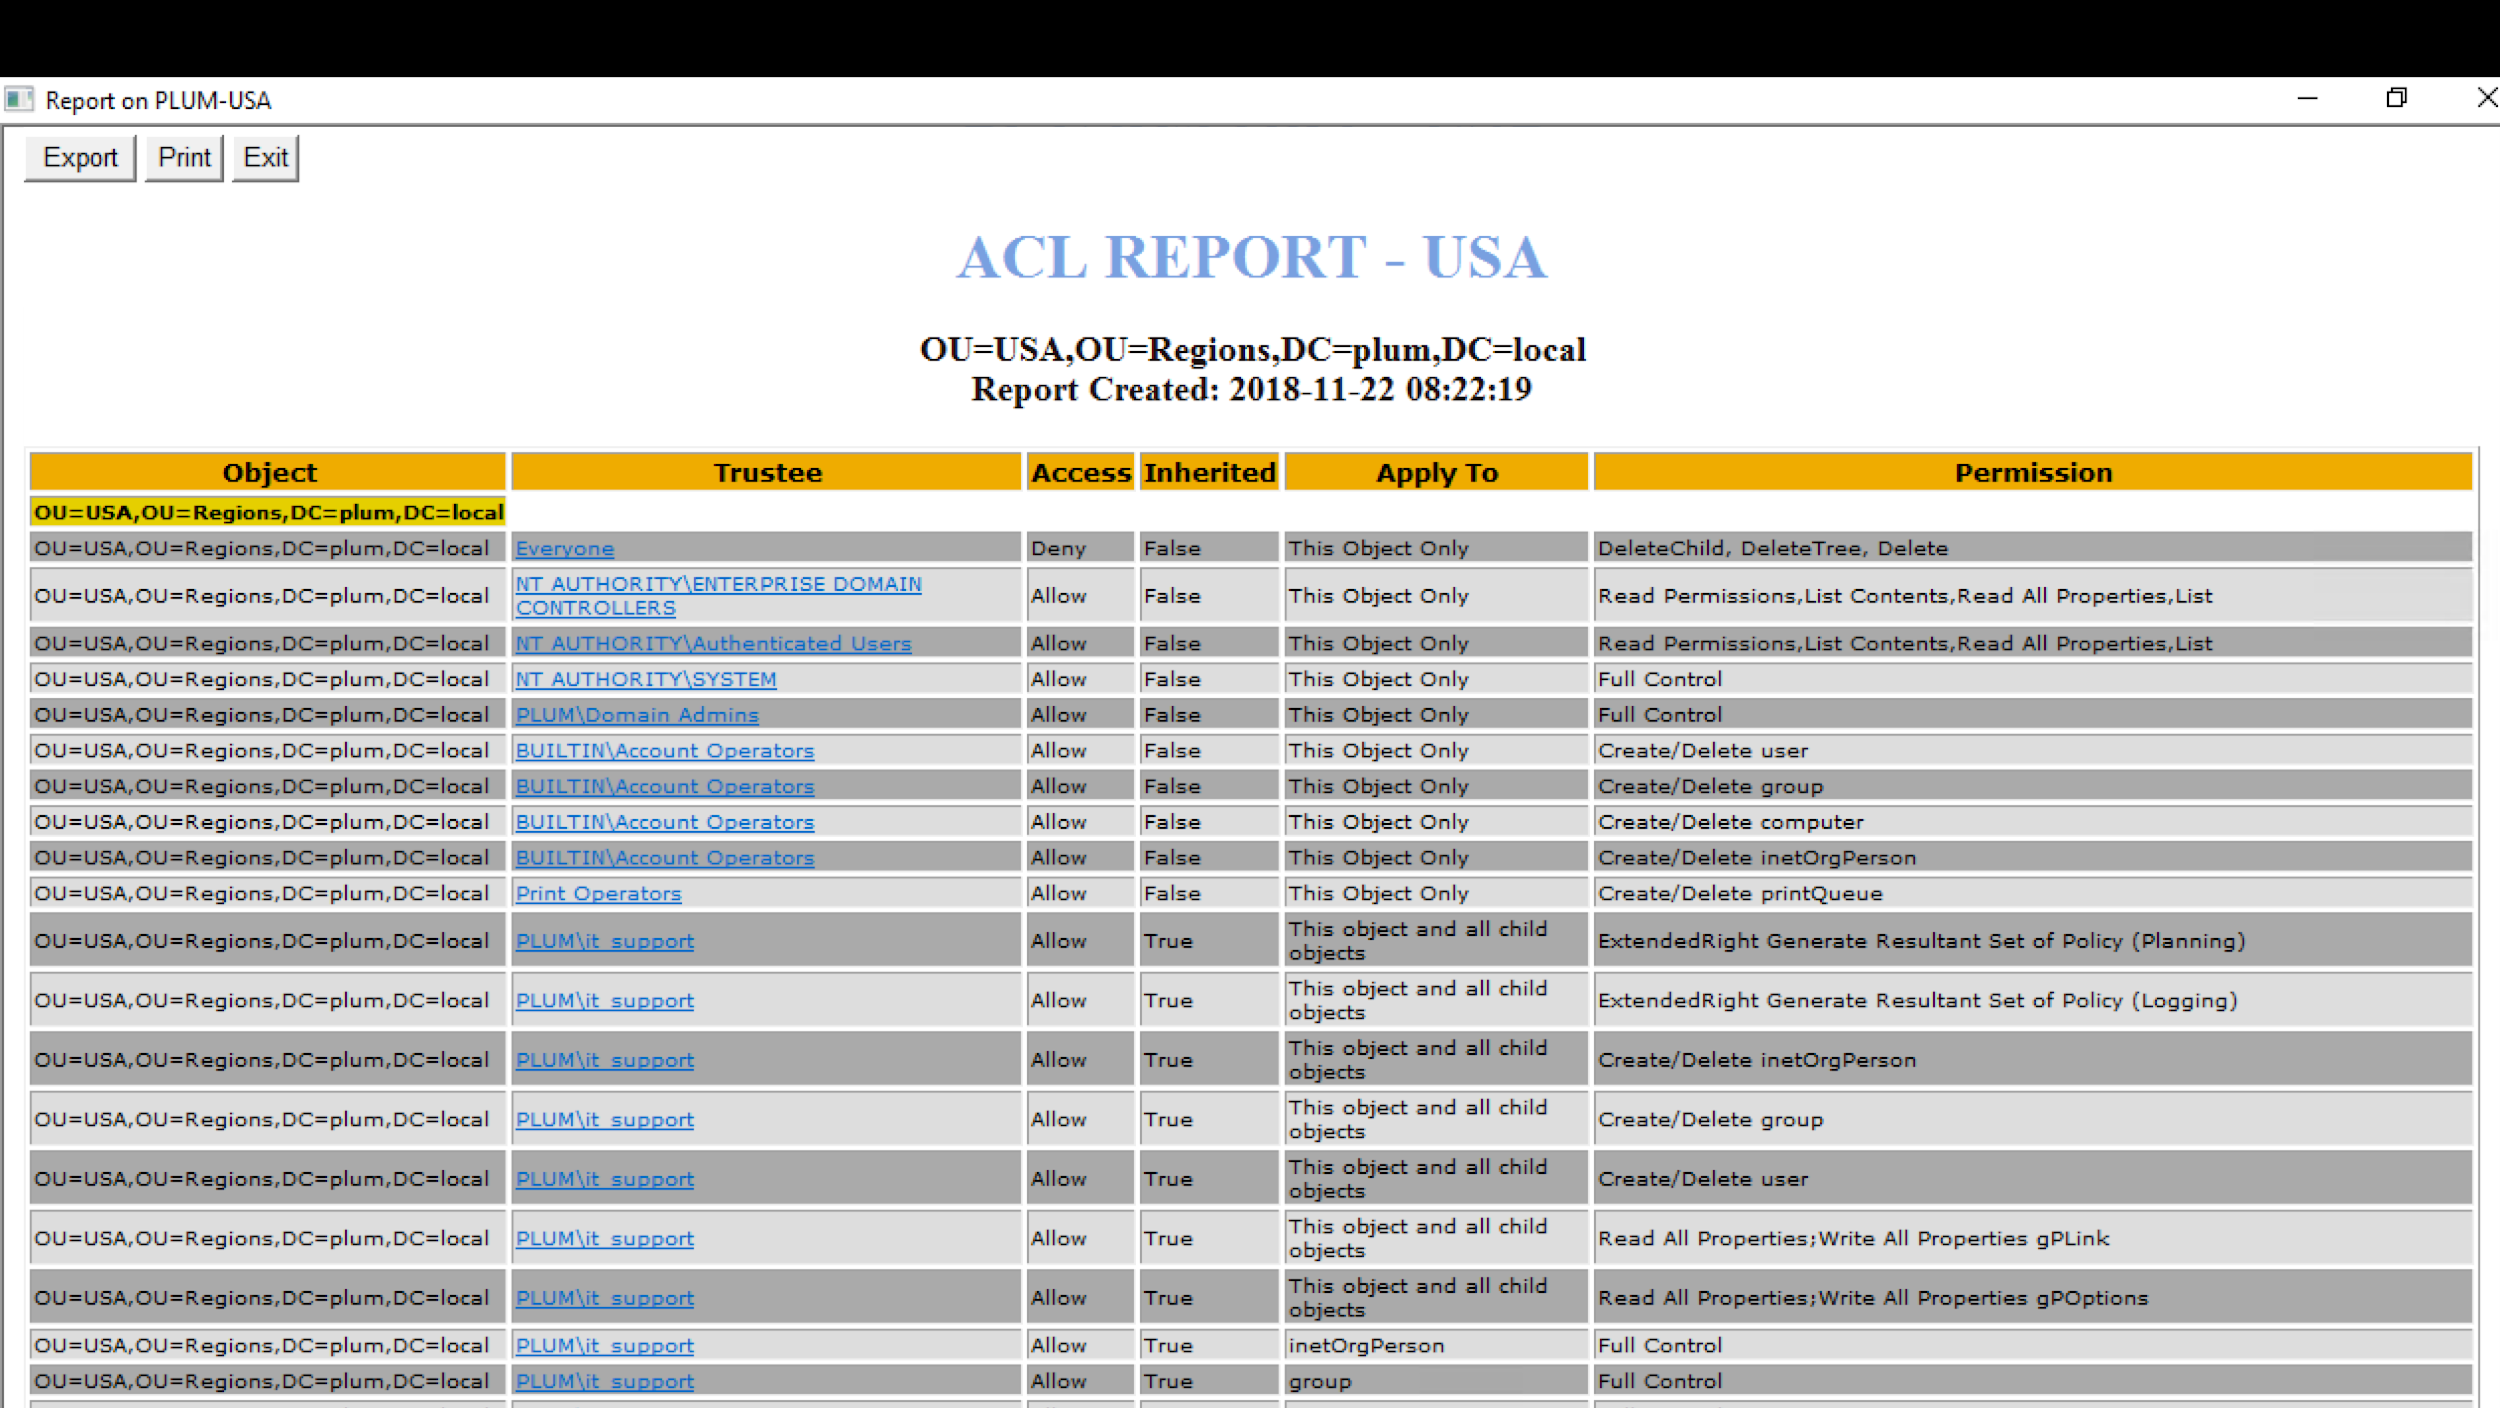 AD ACL Scanner report for OU USA